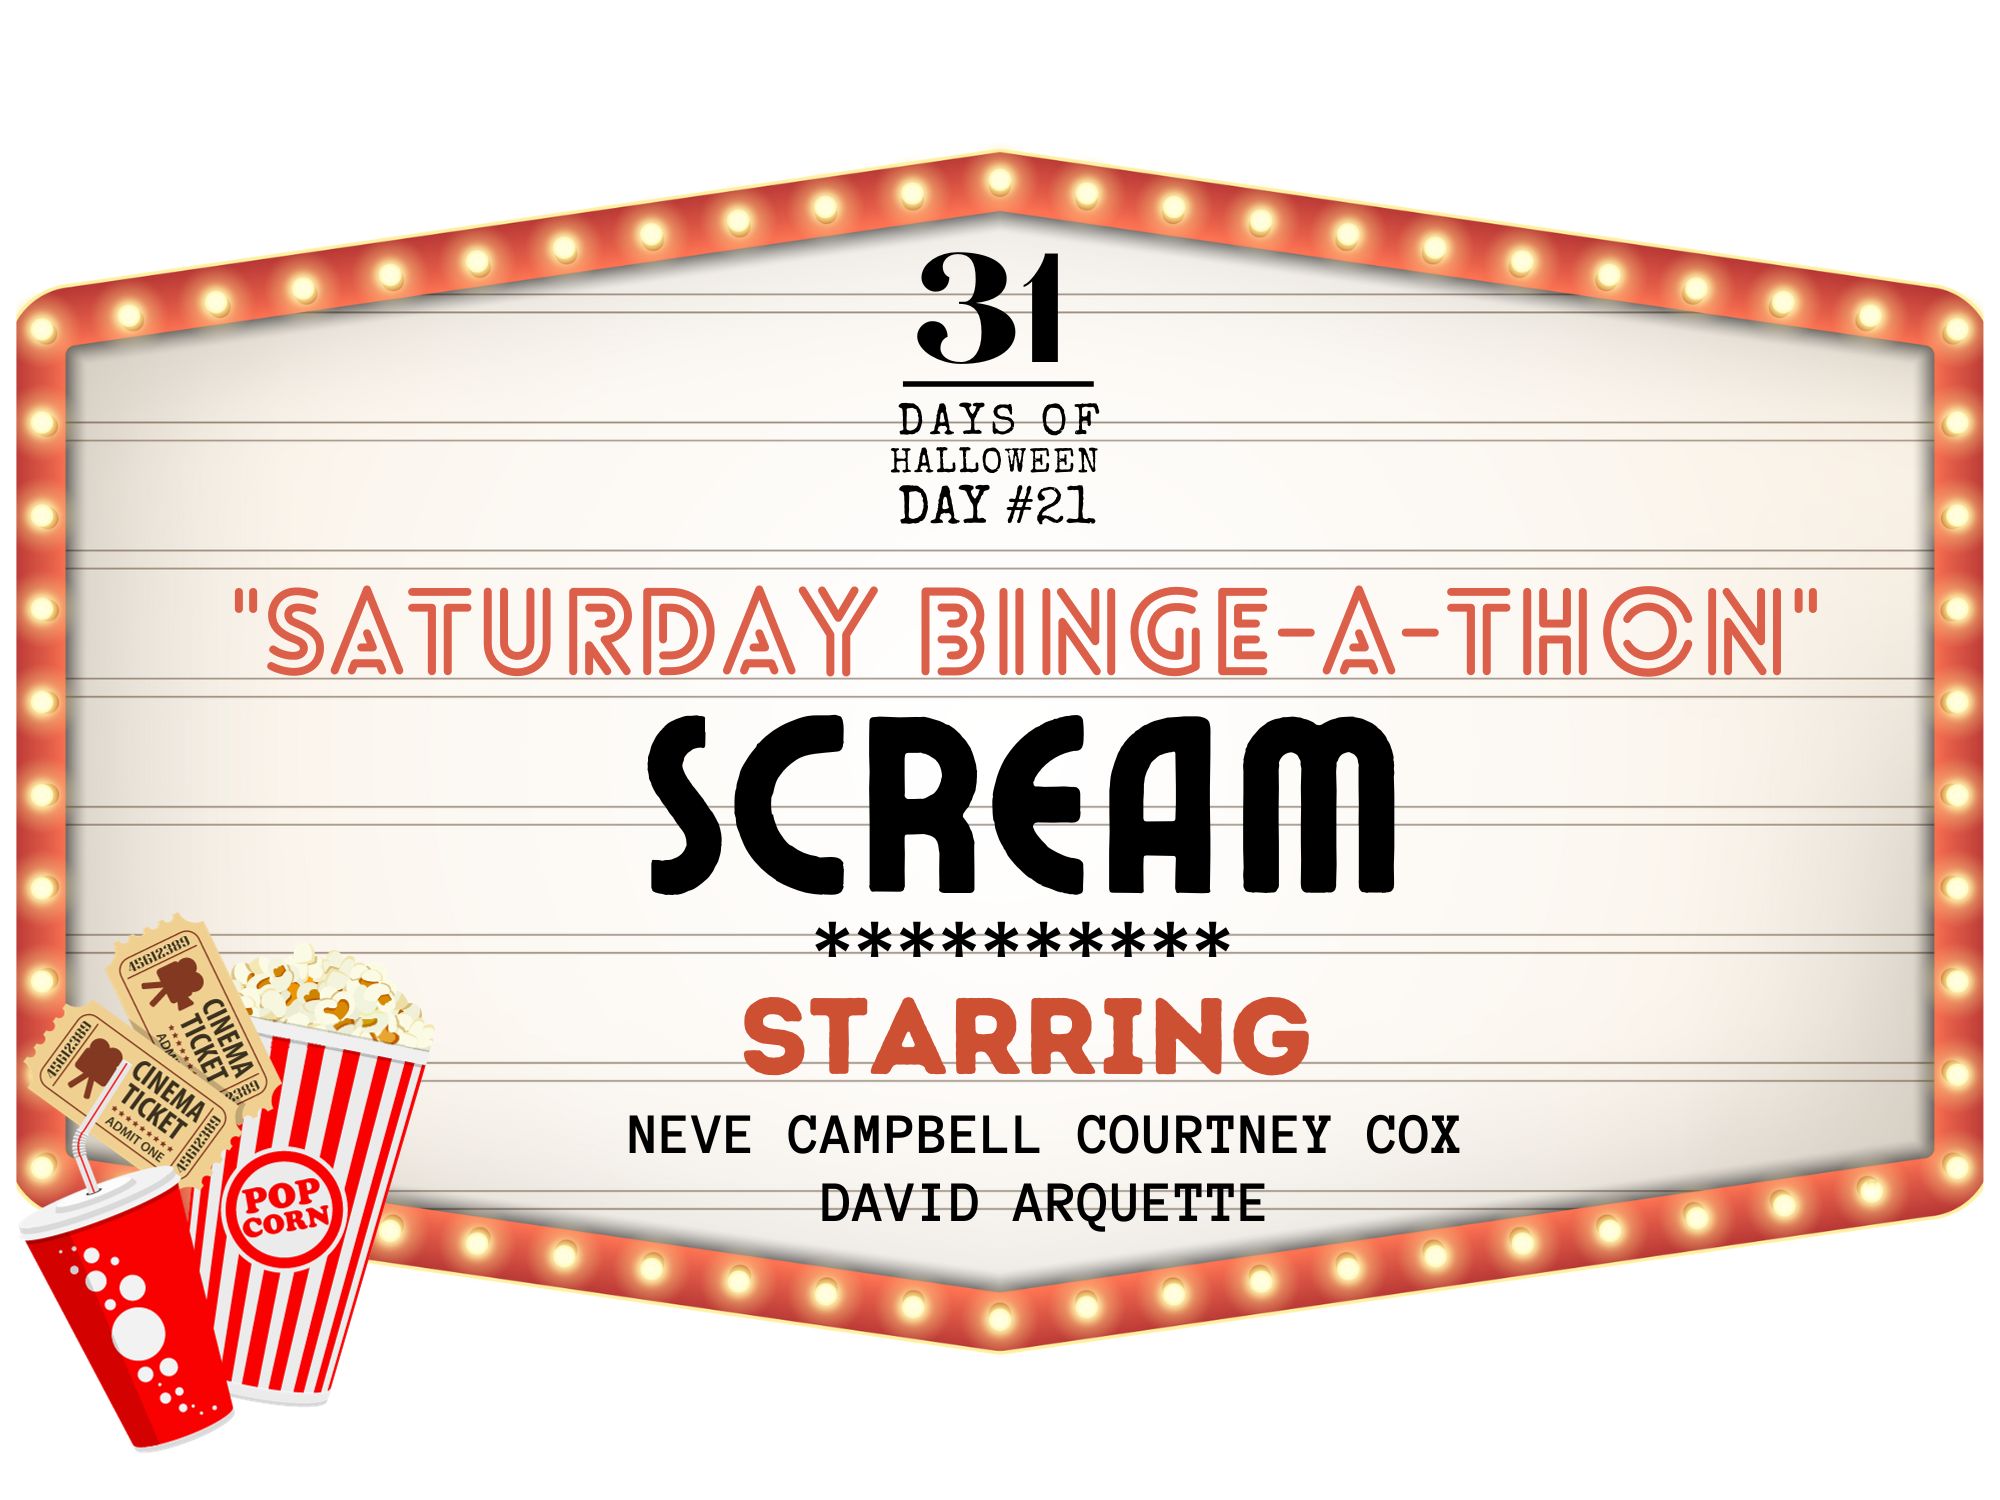 31 Days of Halloween: Day #21 Bing-A-thon, Scream (Franchise)